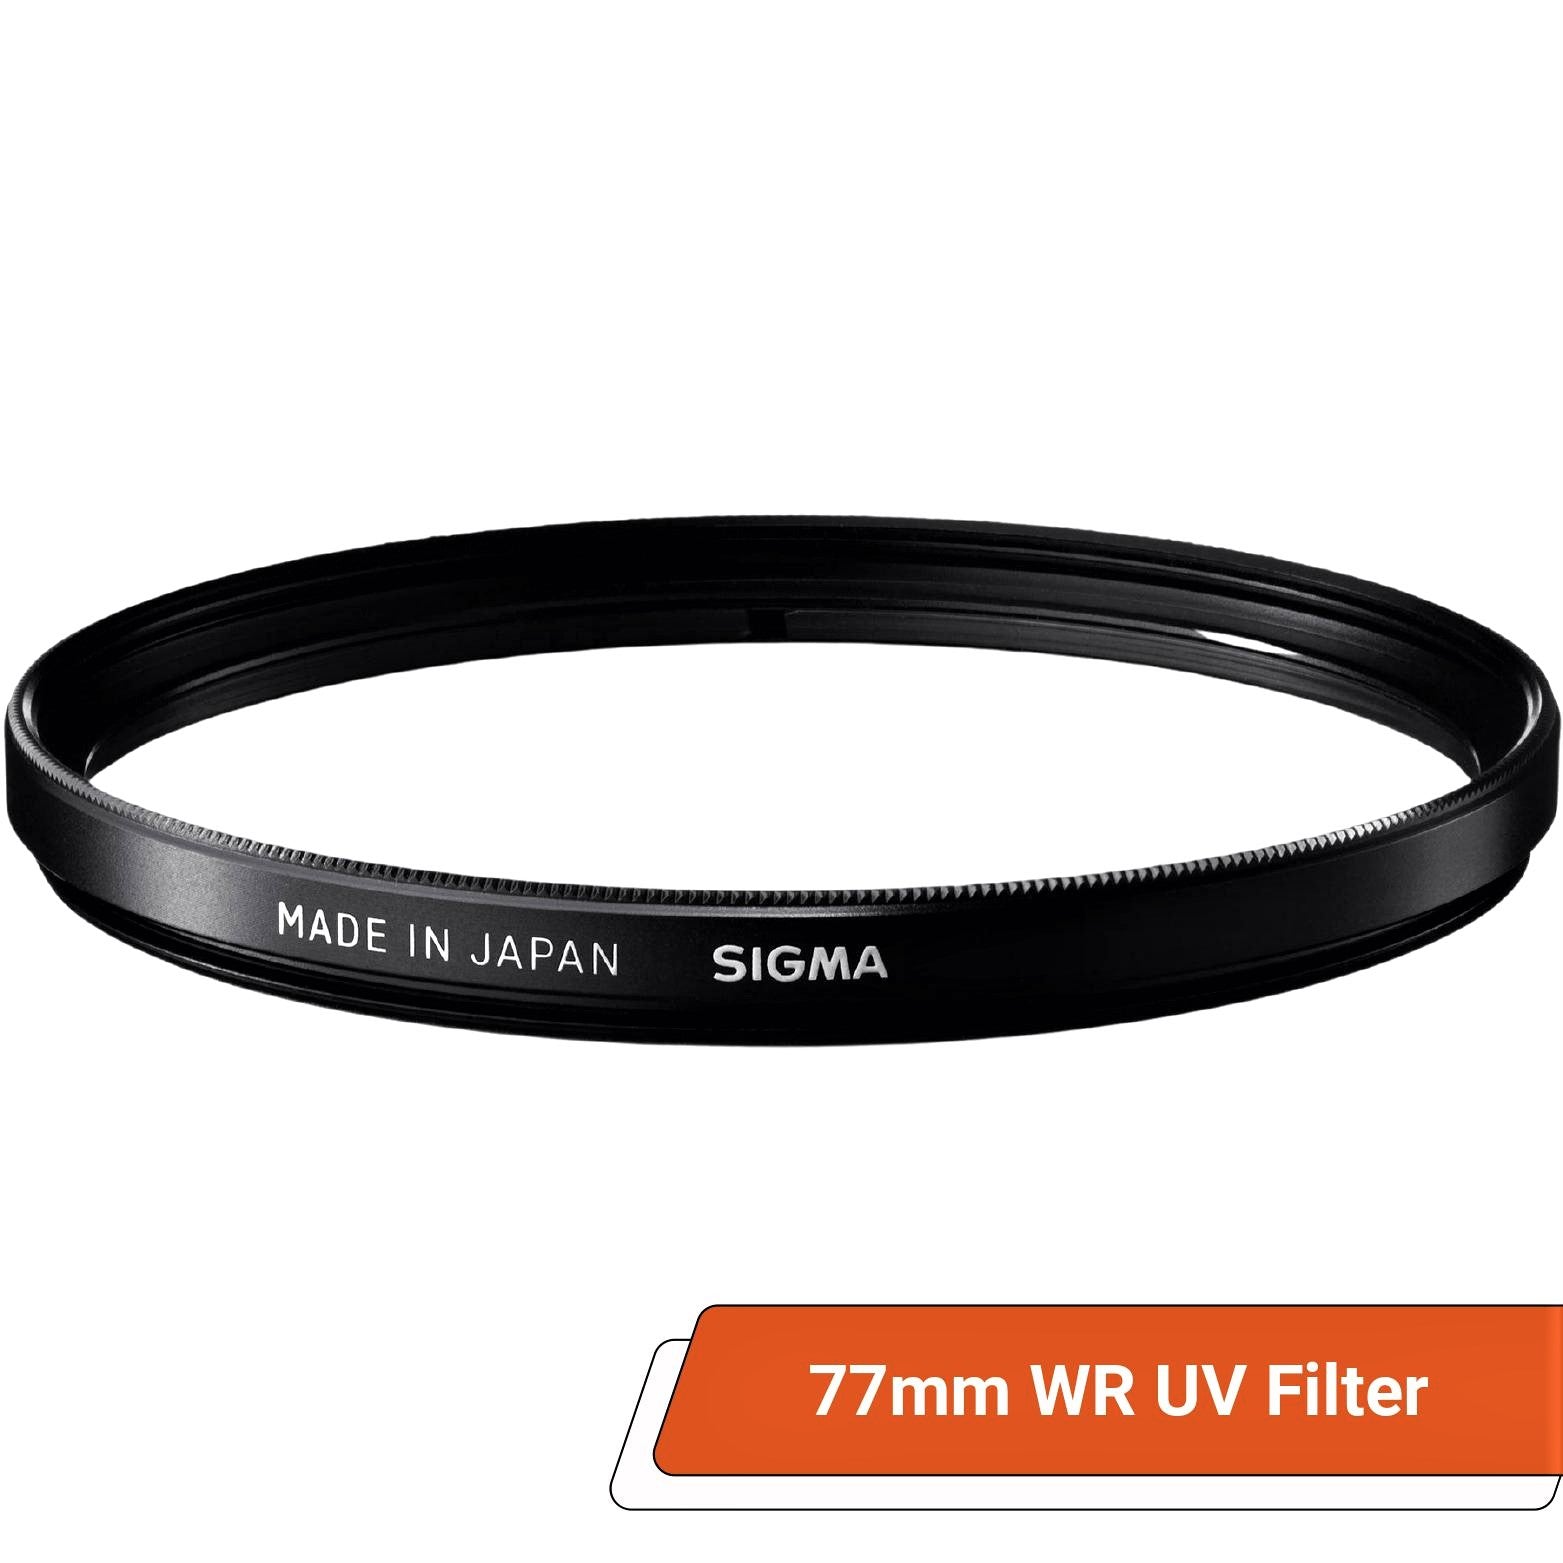 Sigma 77mm WR (Water Repellent) UV Filter